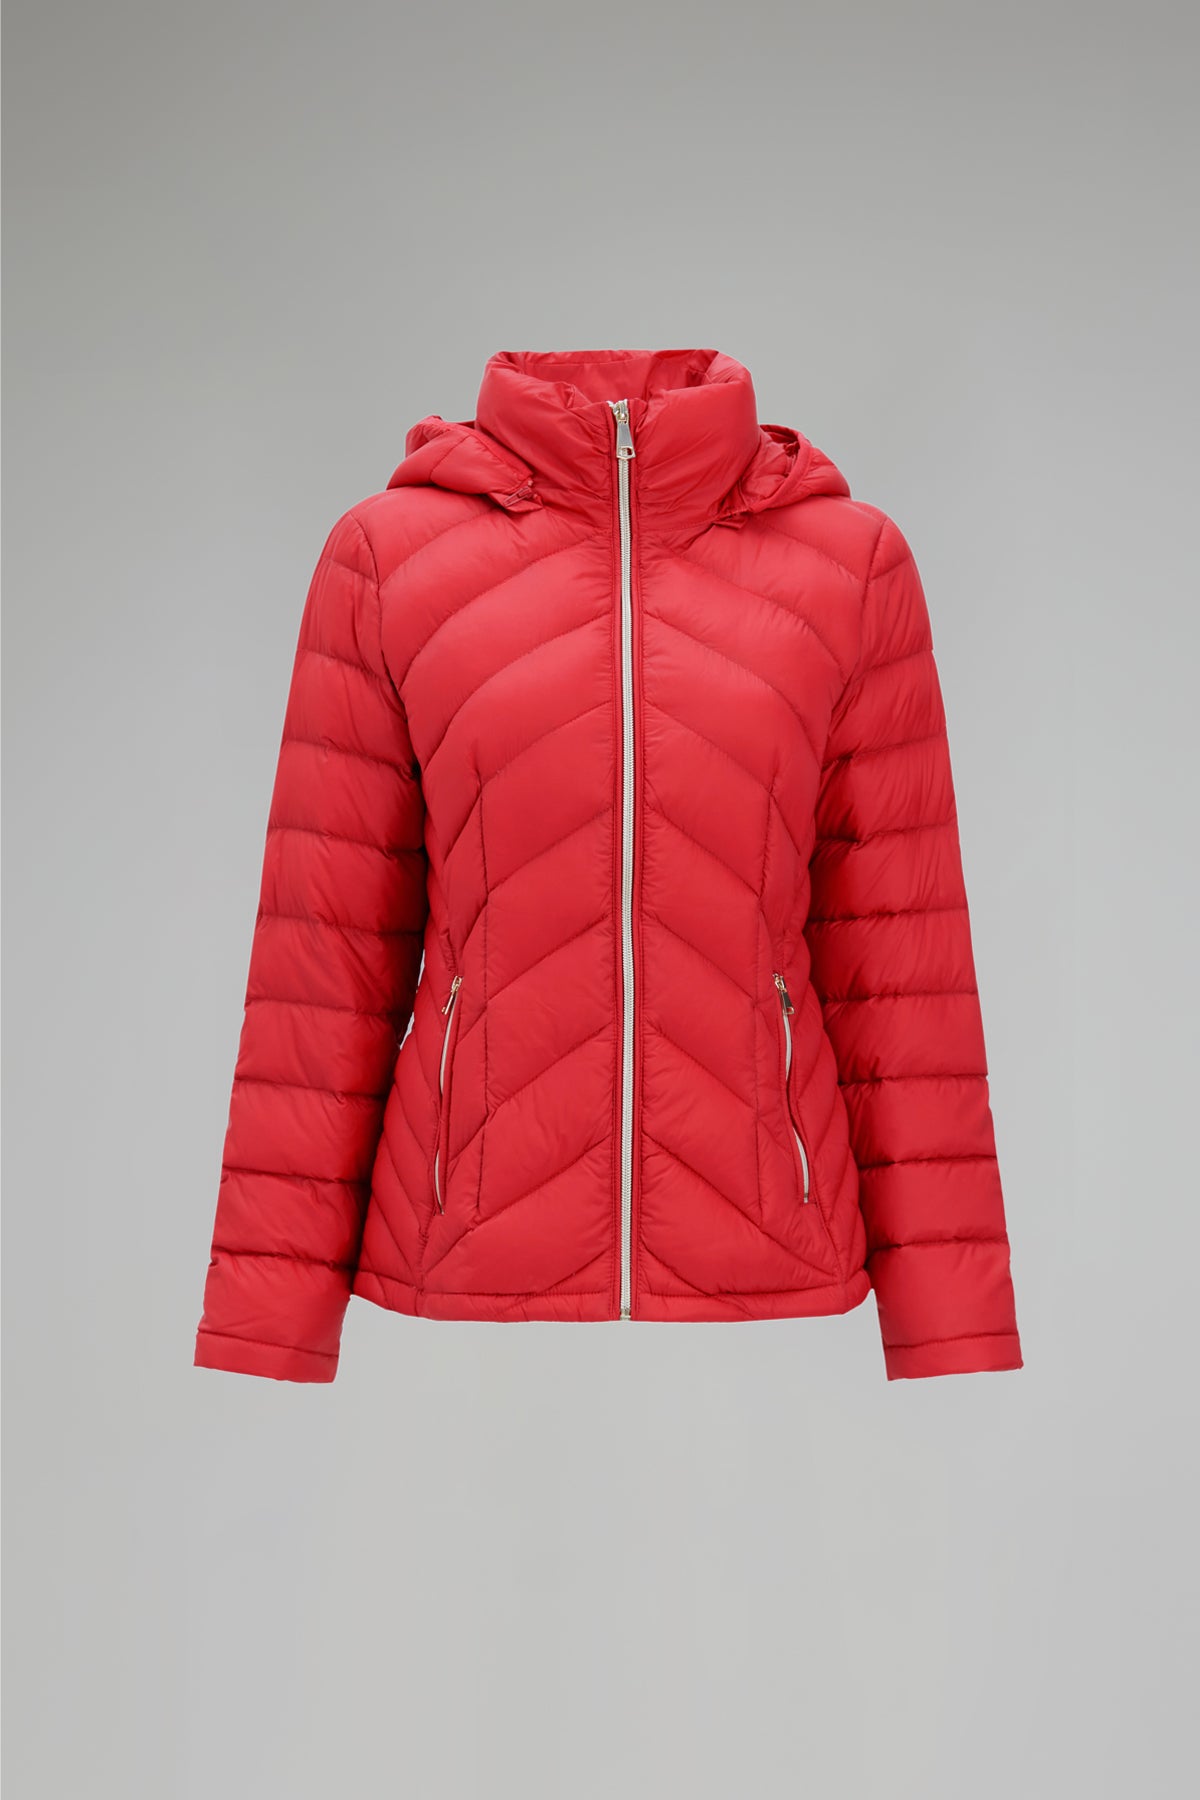 Hollister Womens Jacket Small Red Lightweight Puffer Padded Quilted Coat  Hood *